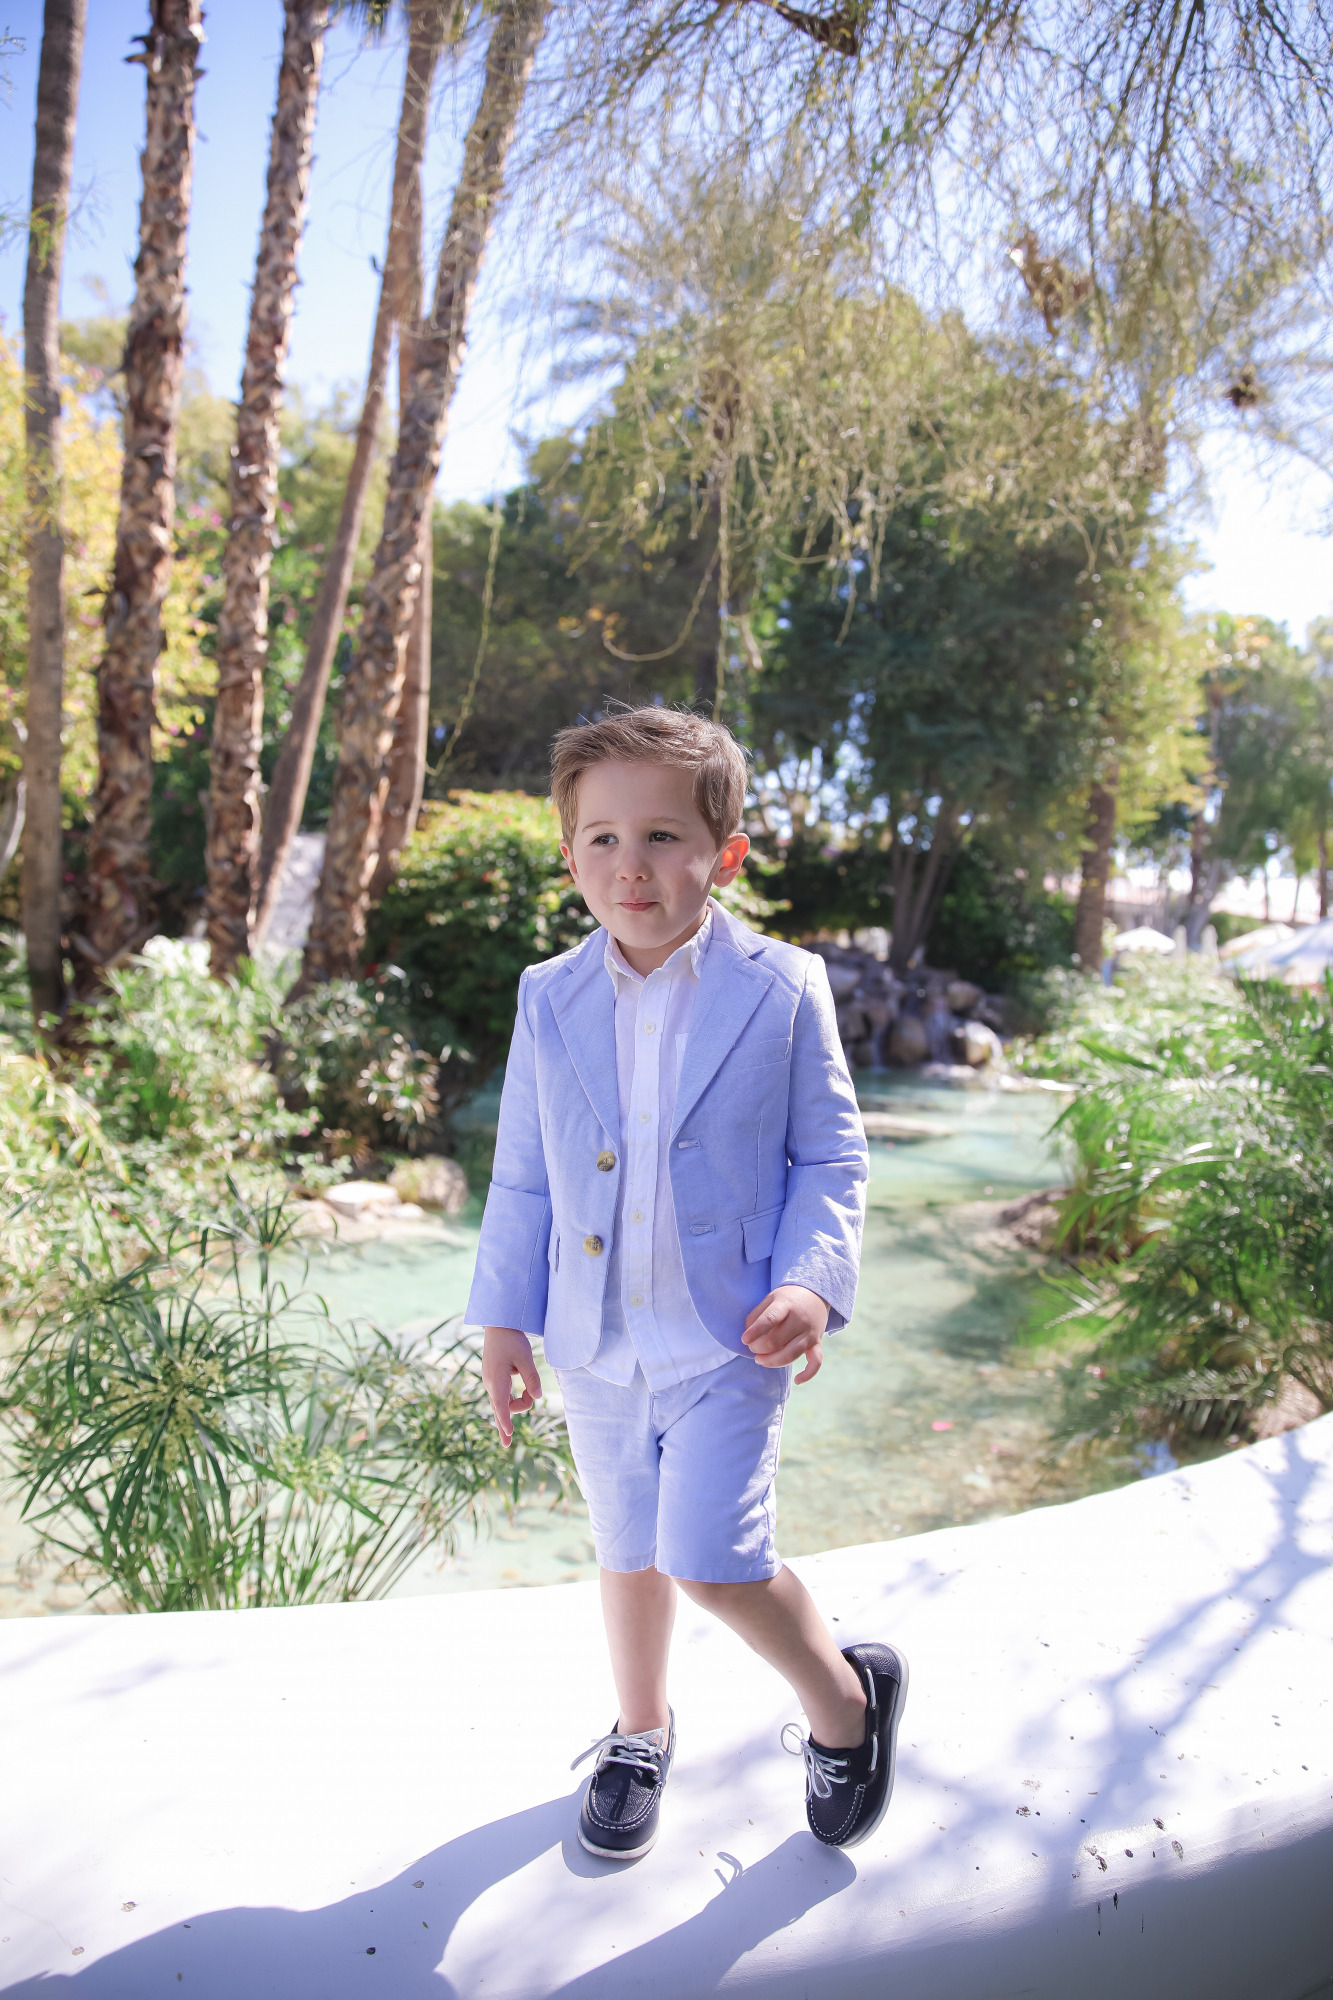 janie and jack easter kids outfits 2021, kids easter outfit ideas toddler, emily gemma, scottsdale fashion blog4 |Spring Outfit Ideas for Kids by popular US fashion blog, The Sweetest Thing: image of a young boy standing outside next to a landscaped pond and wearing a Seersucker Blazer, Seersucker Shorts, White Button-down, and Leather Boat Shoes.